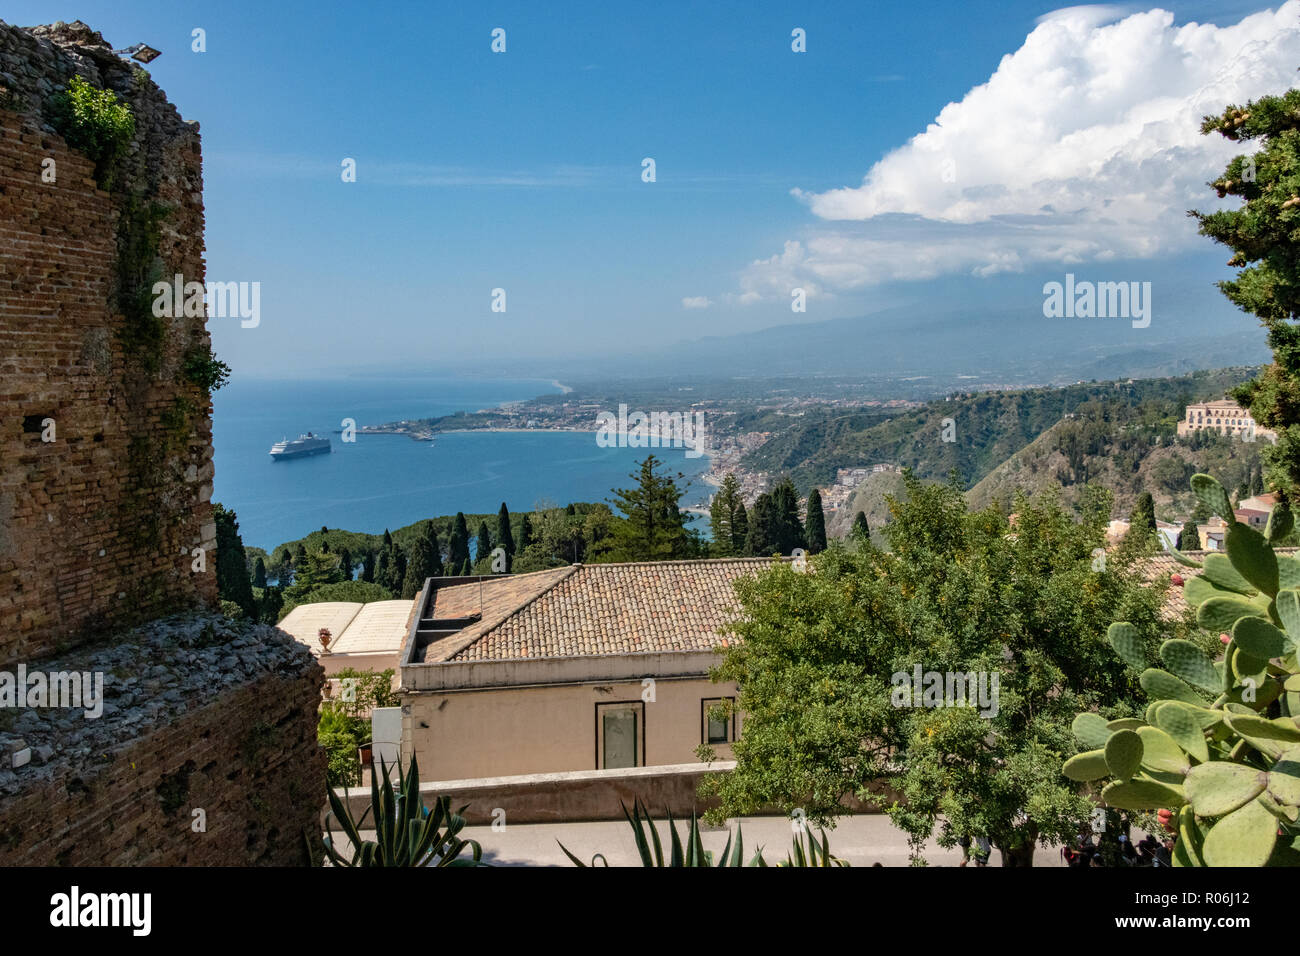 View from Amphitheatre in Taormina, Sicily Stock Photo